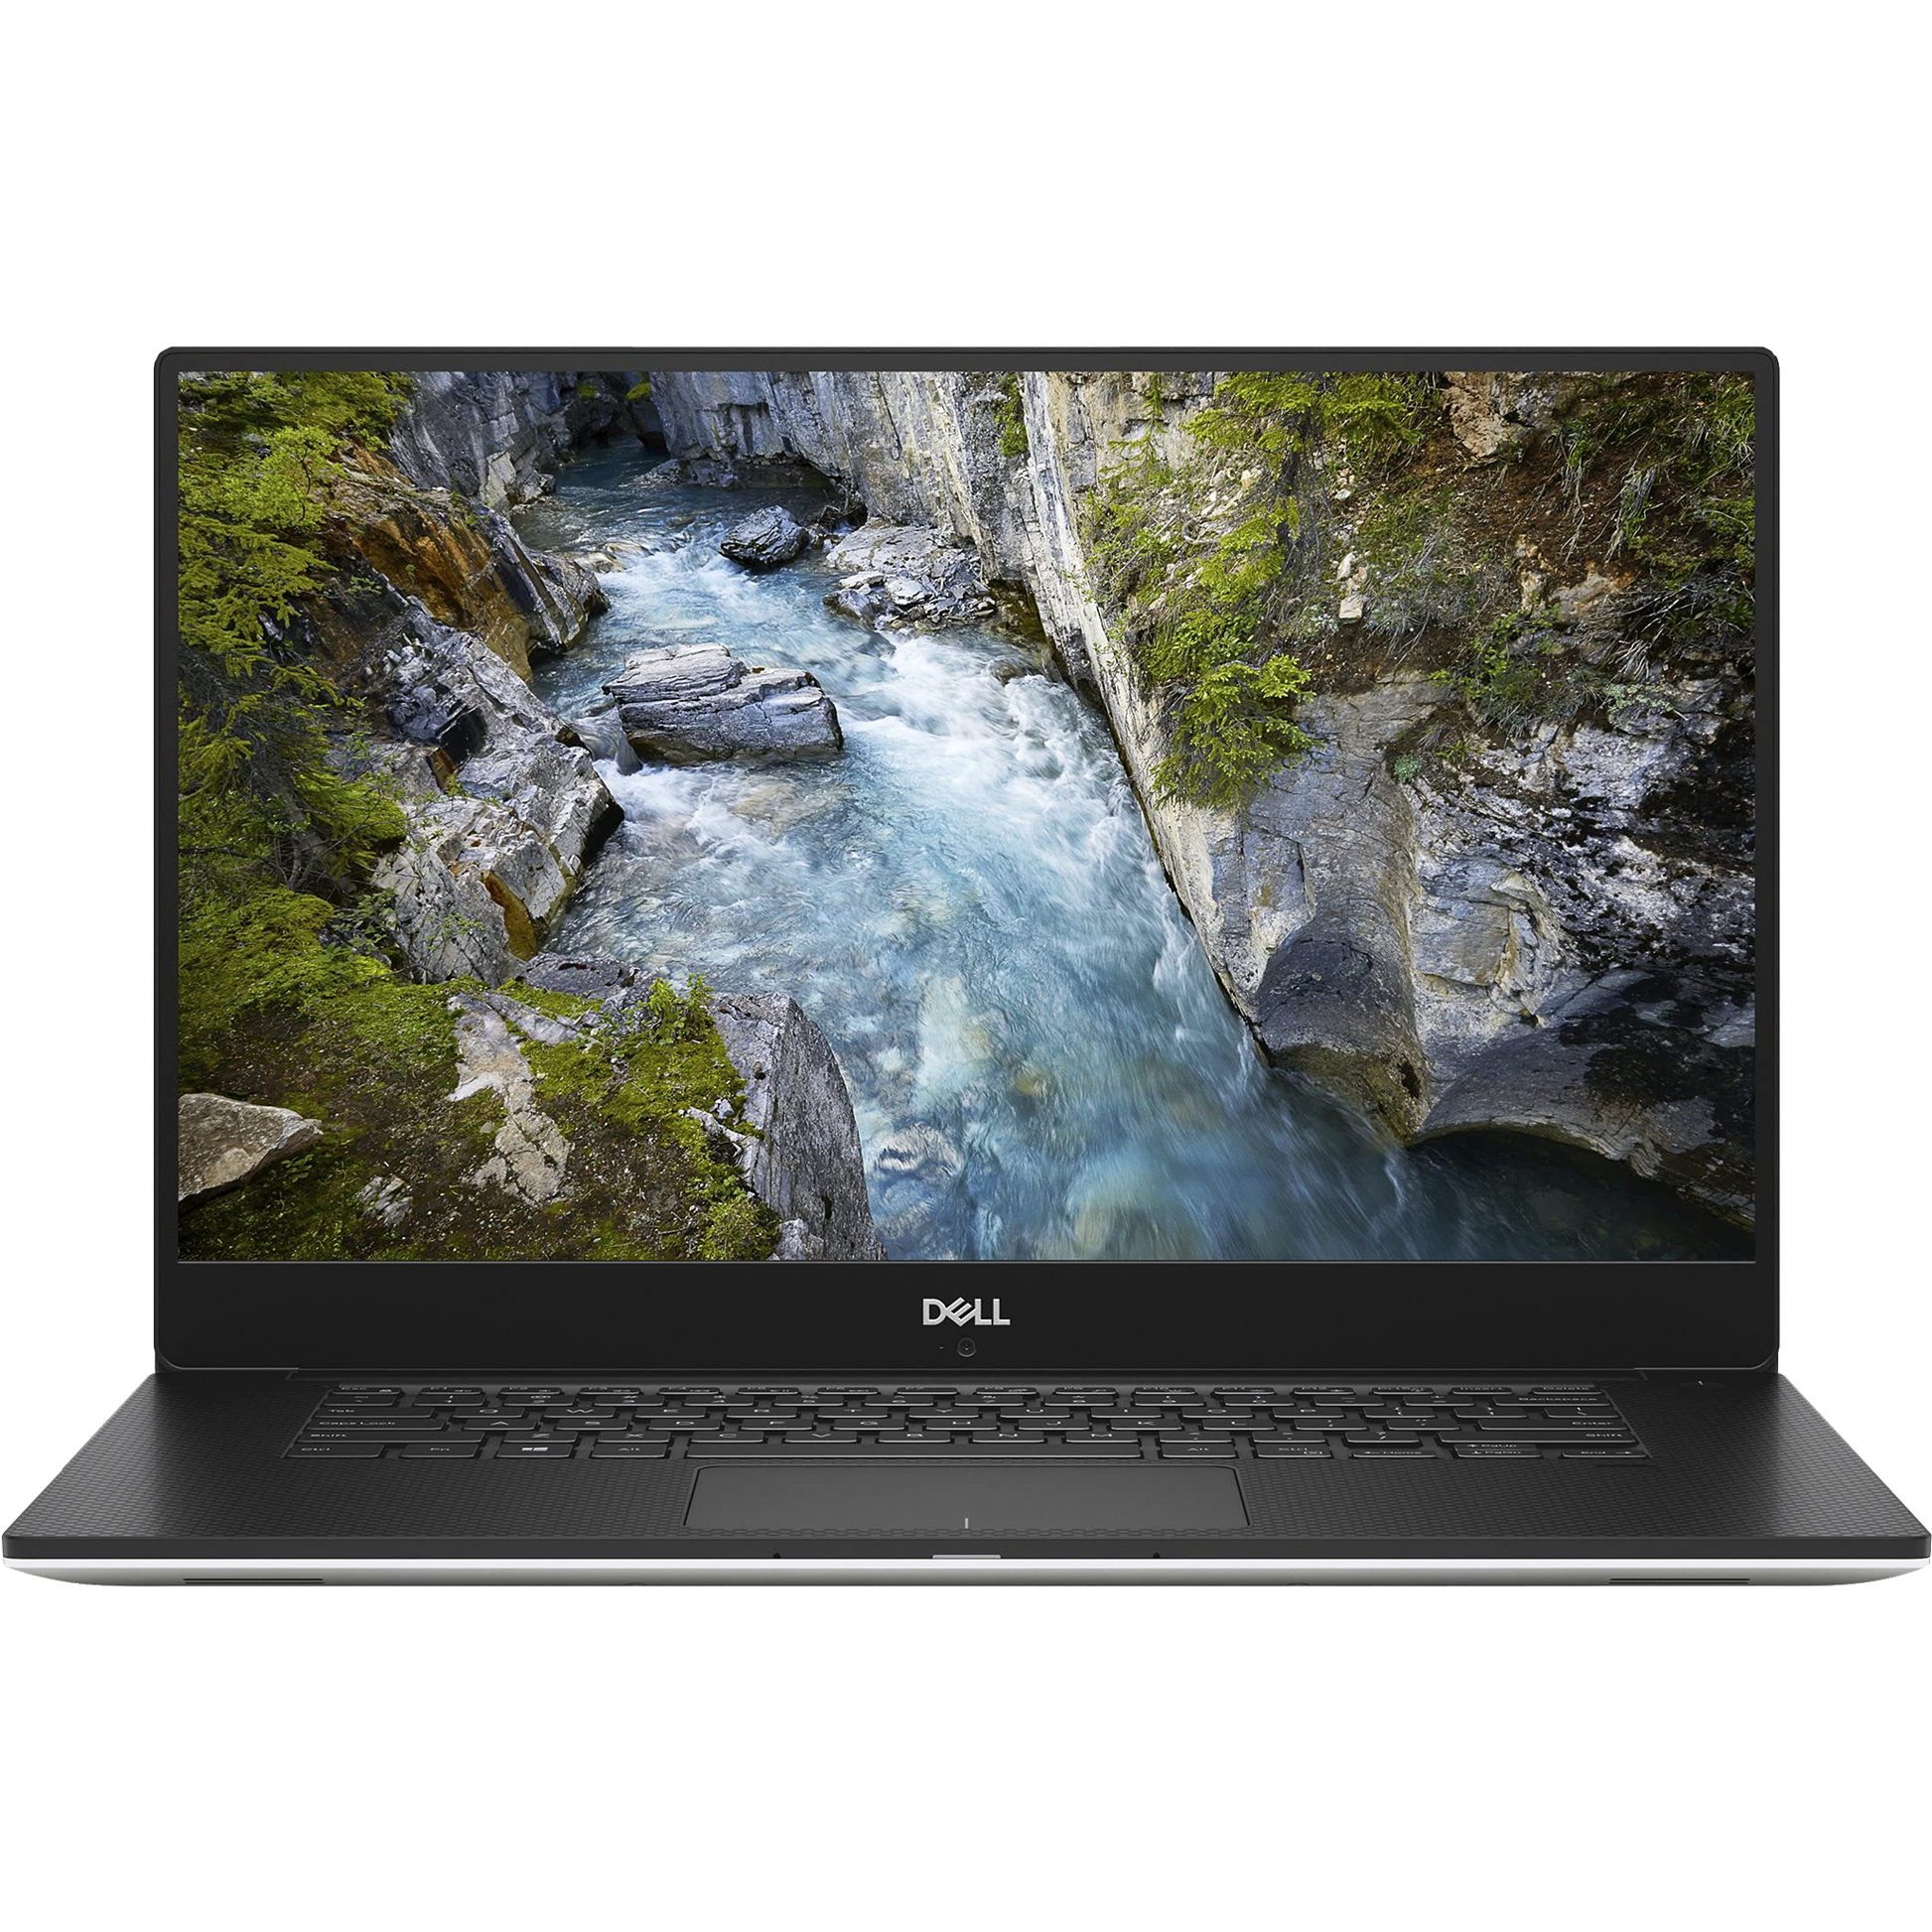 Dell Precision 5540 Intel i7, Mobile Workstation Touch Laptop with Win 11 Pro Laptops - Refurbished